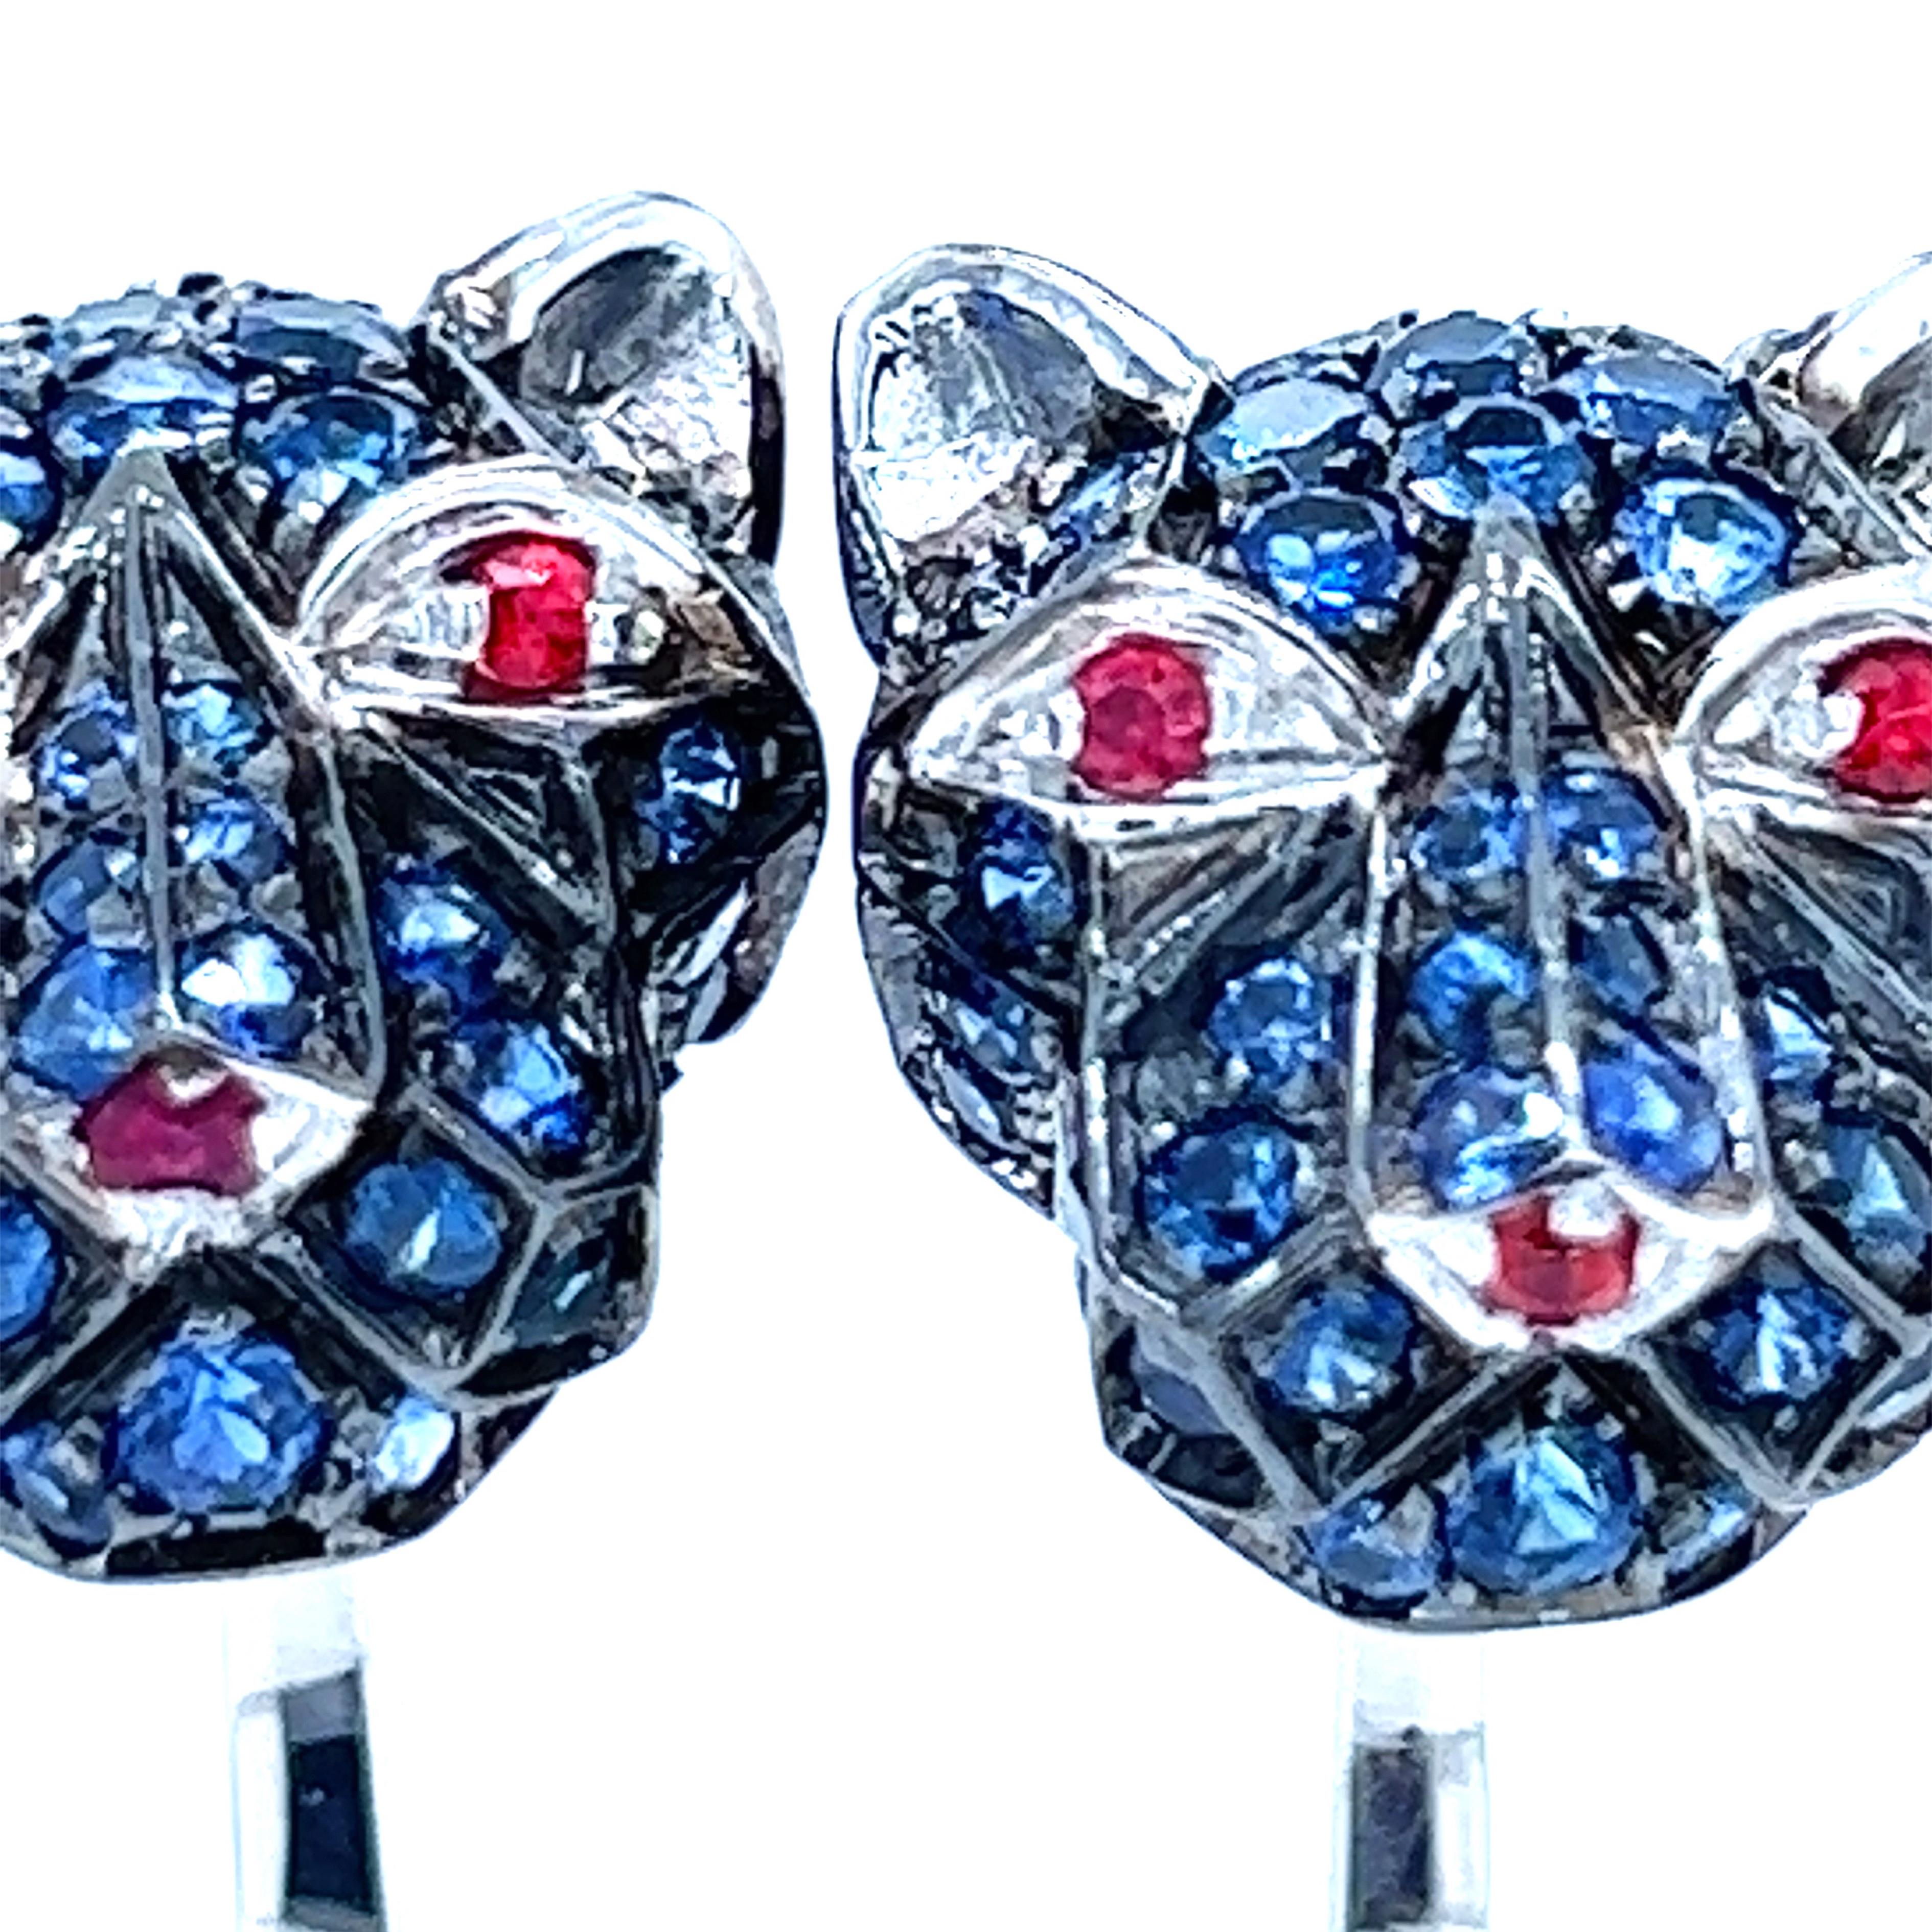 Awesome, Unique yet Timeless, Absolutely Chic 3.97 Carat Natural Royal Blue Sapphire, Eyes and Nose set with 0.32 Carat Natural Round Ruby, Cougar Head Shaped T-Bar Back in a  White Gold Setting Cufflinks.
In our smart fitted whiskey brown suede